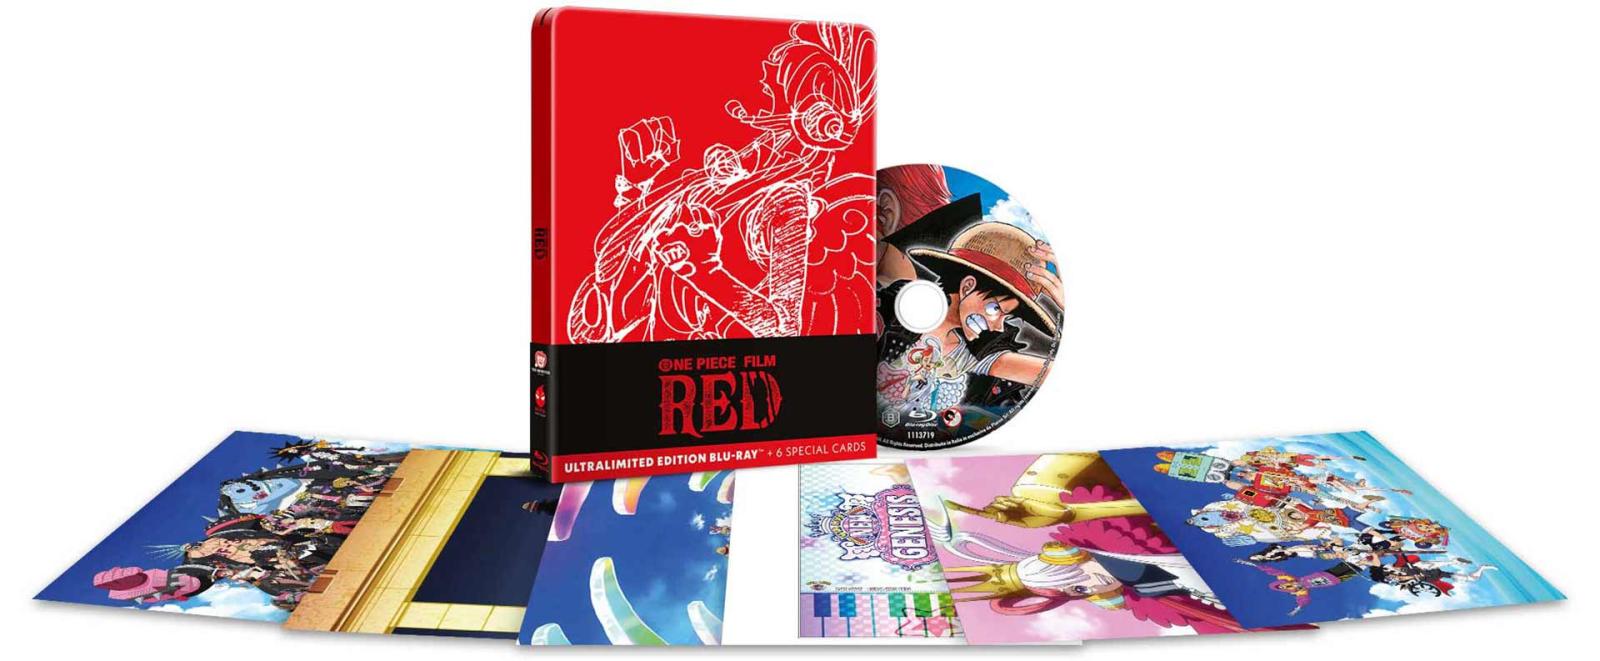 One Piece Film: RED - Steelbook Ultralimited Edition Blu-ray + 6 Special Cards (Blu-ray) Image 4